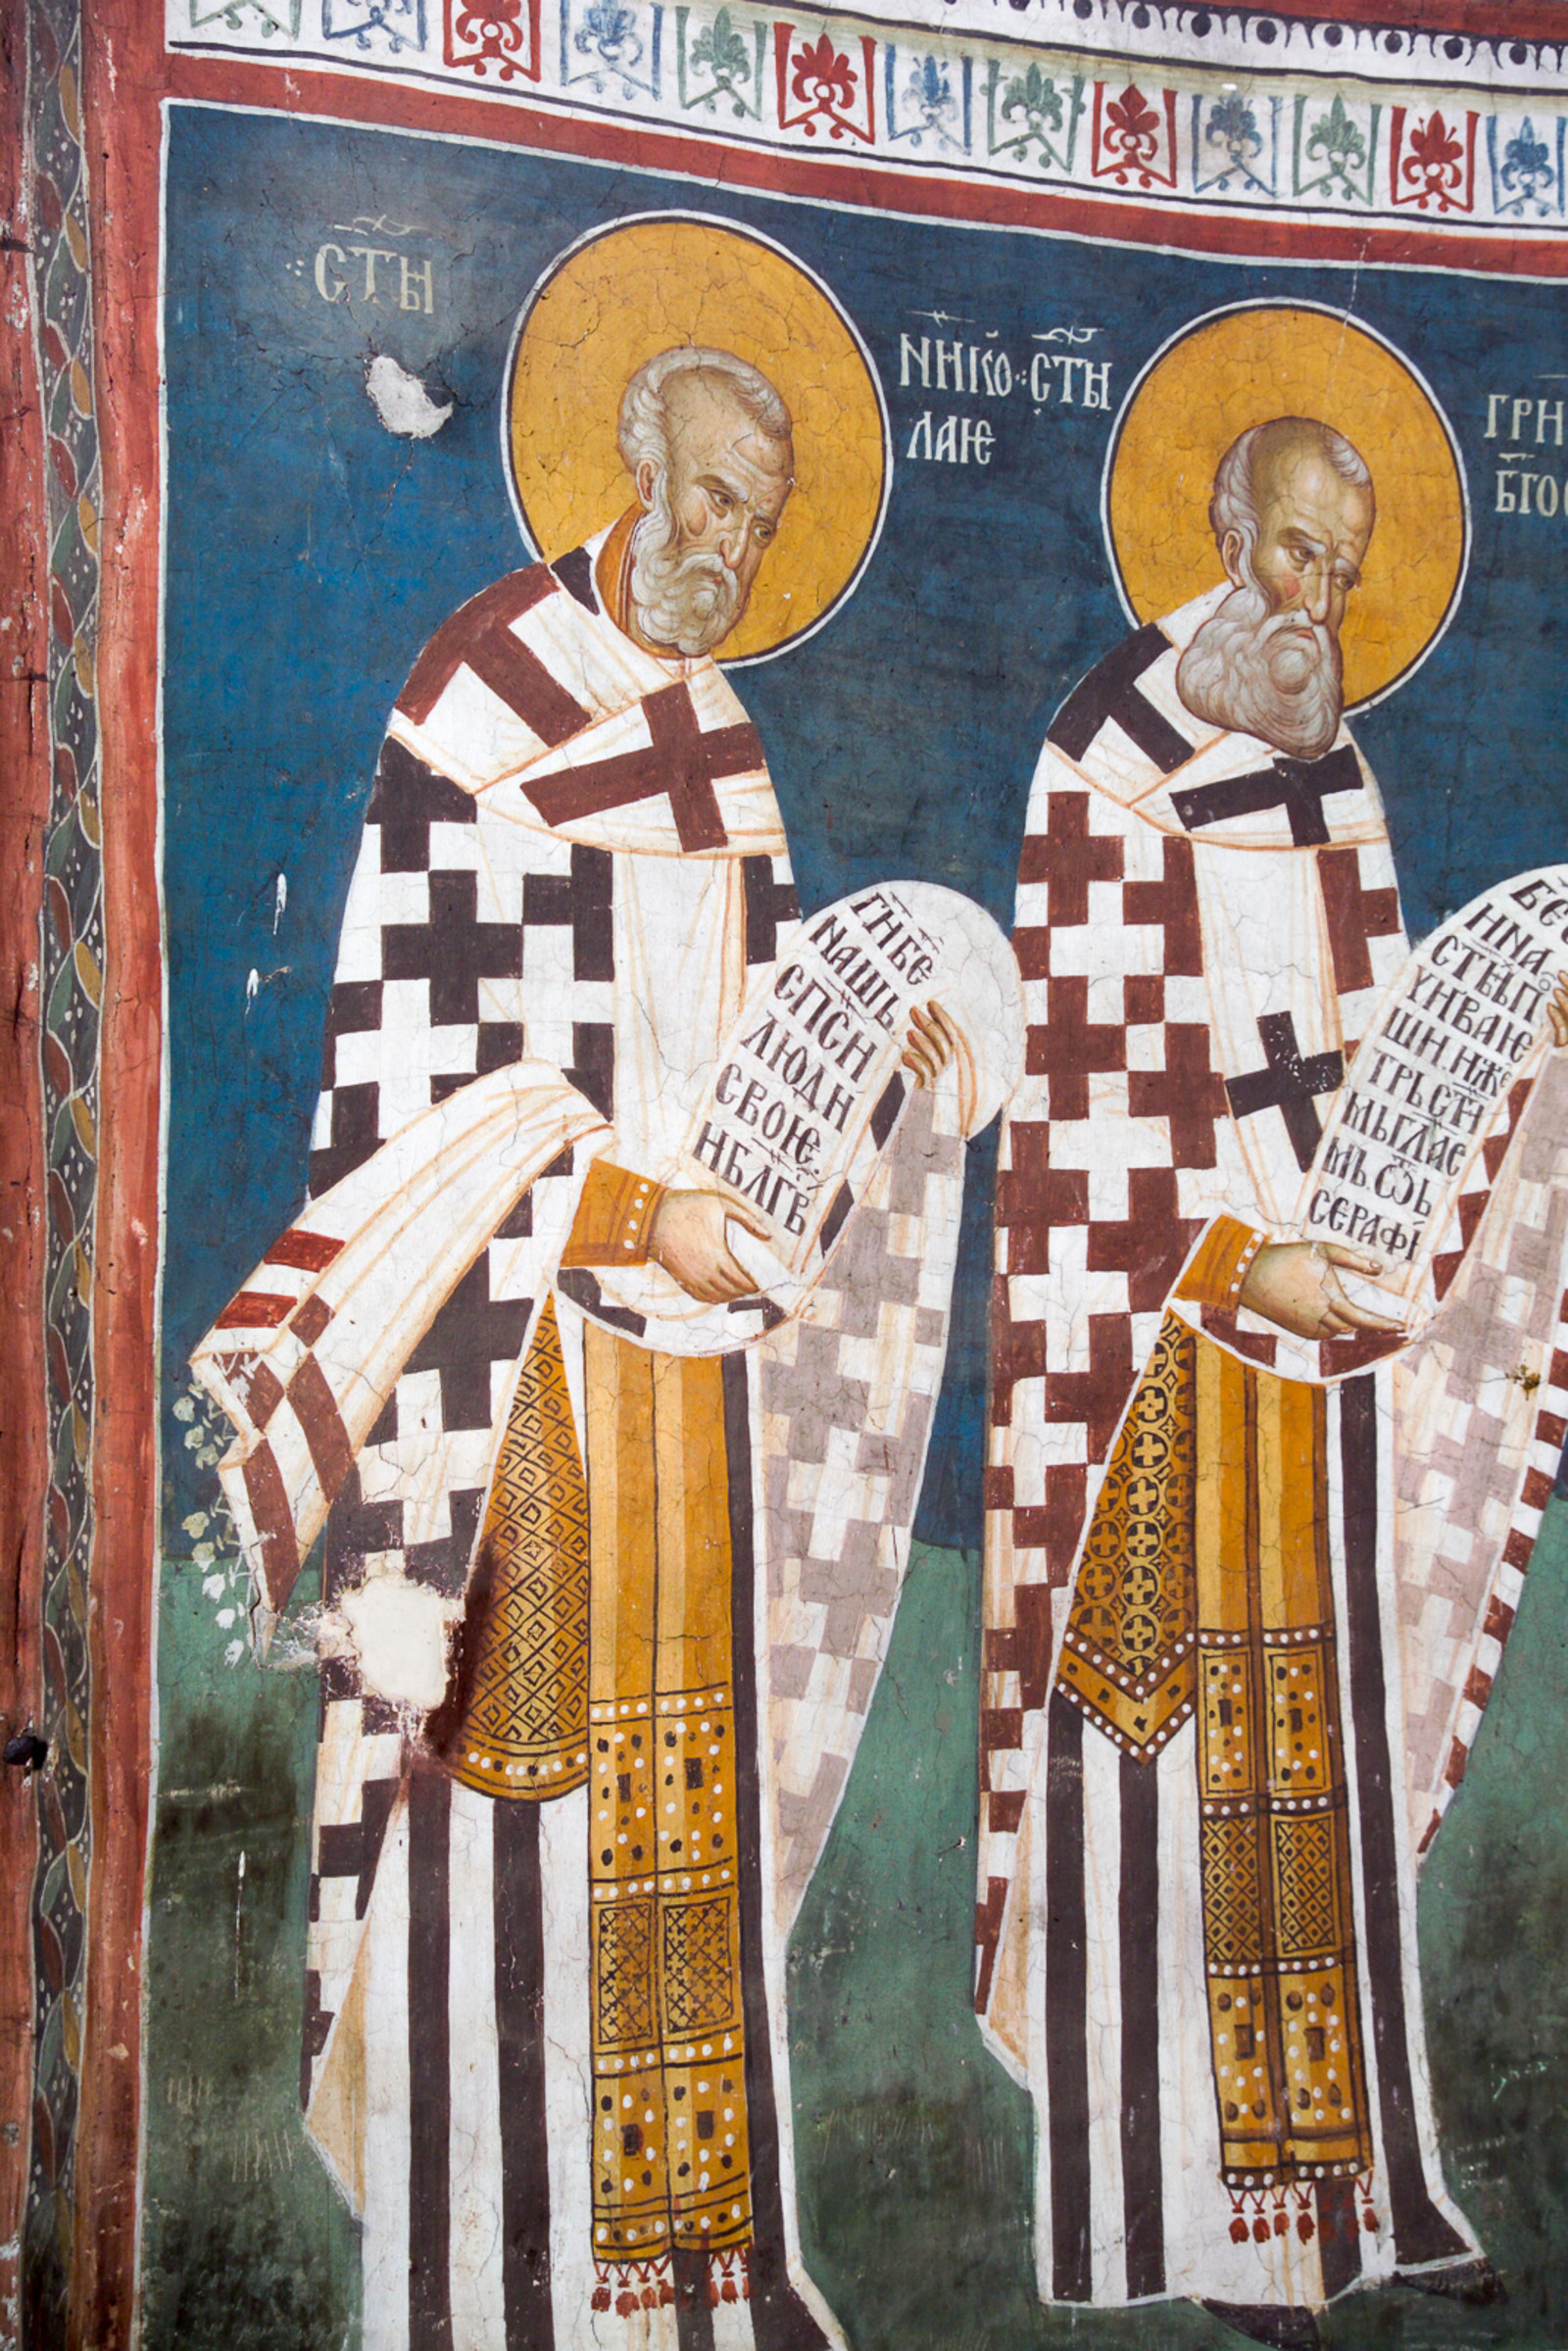 21,20 Officiating Church Fathers: St. Nicholas (left) and St. Gregory the Theologian (right)